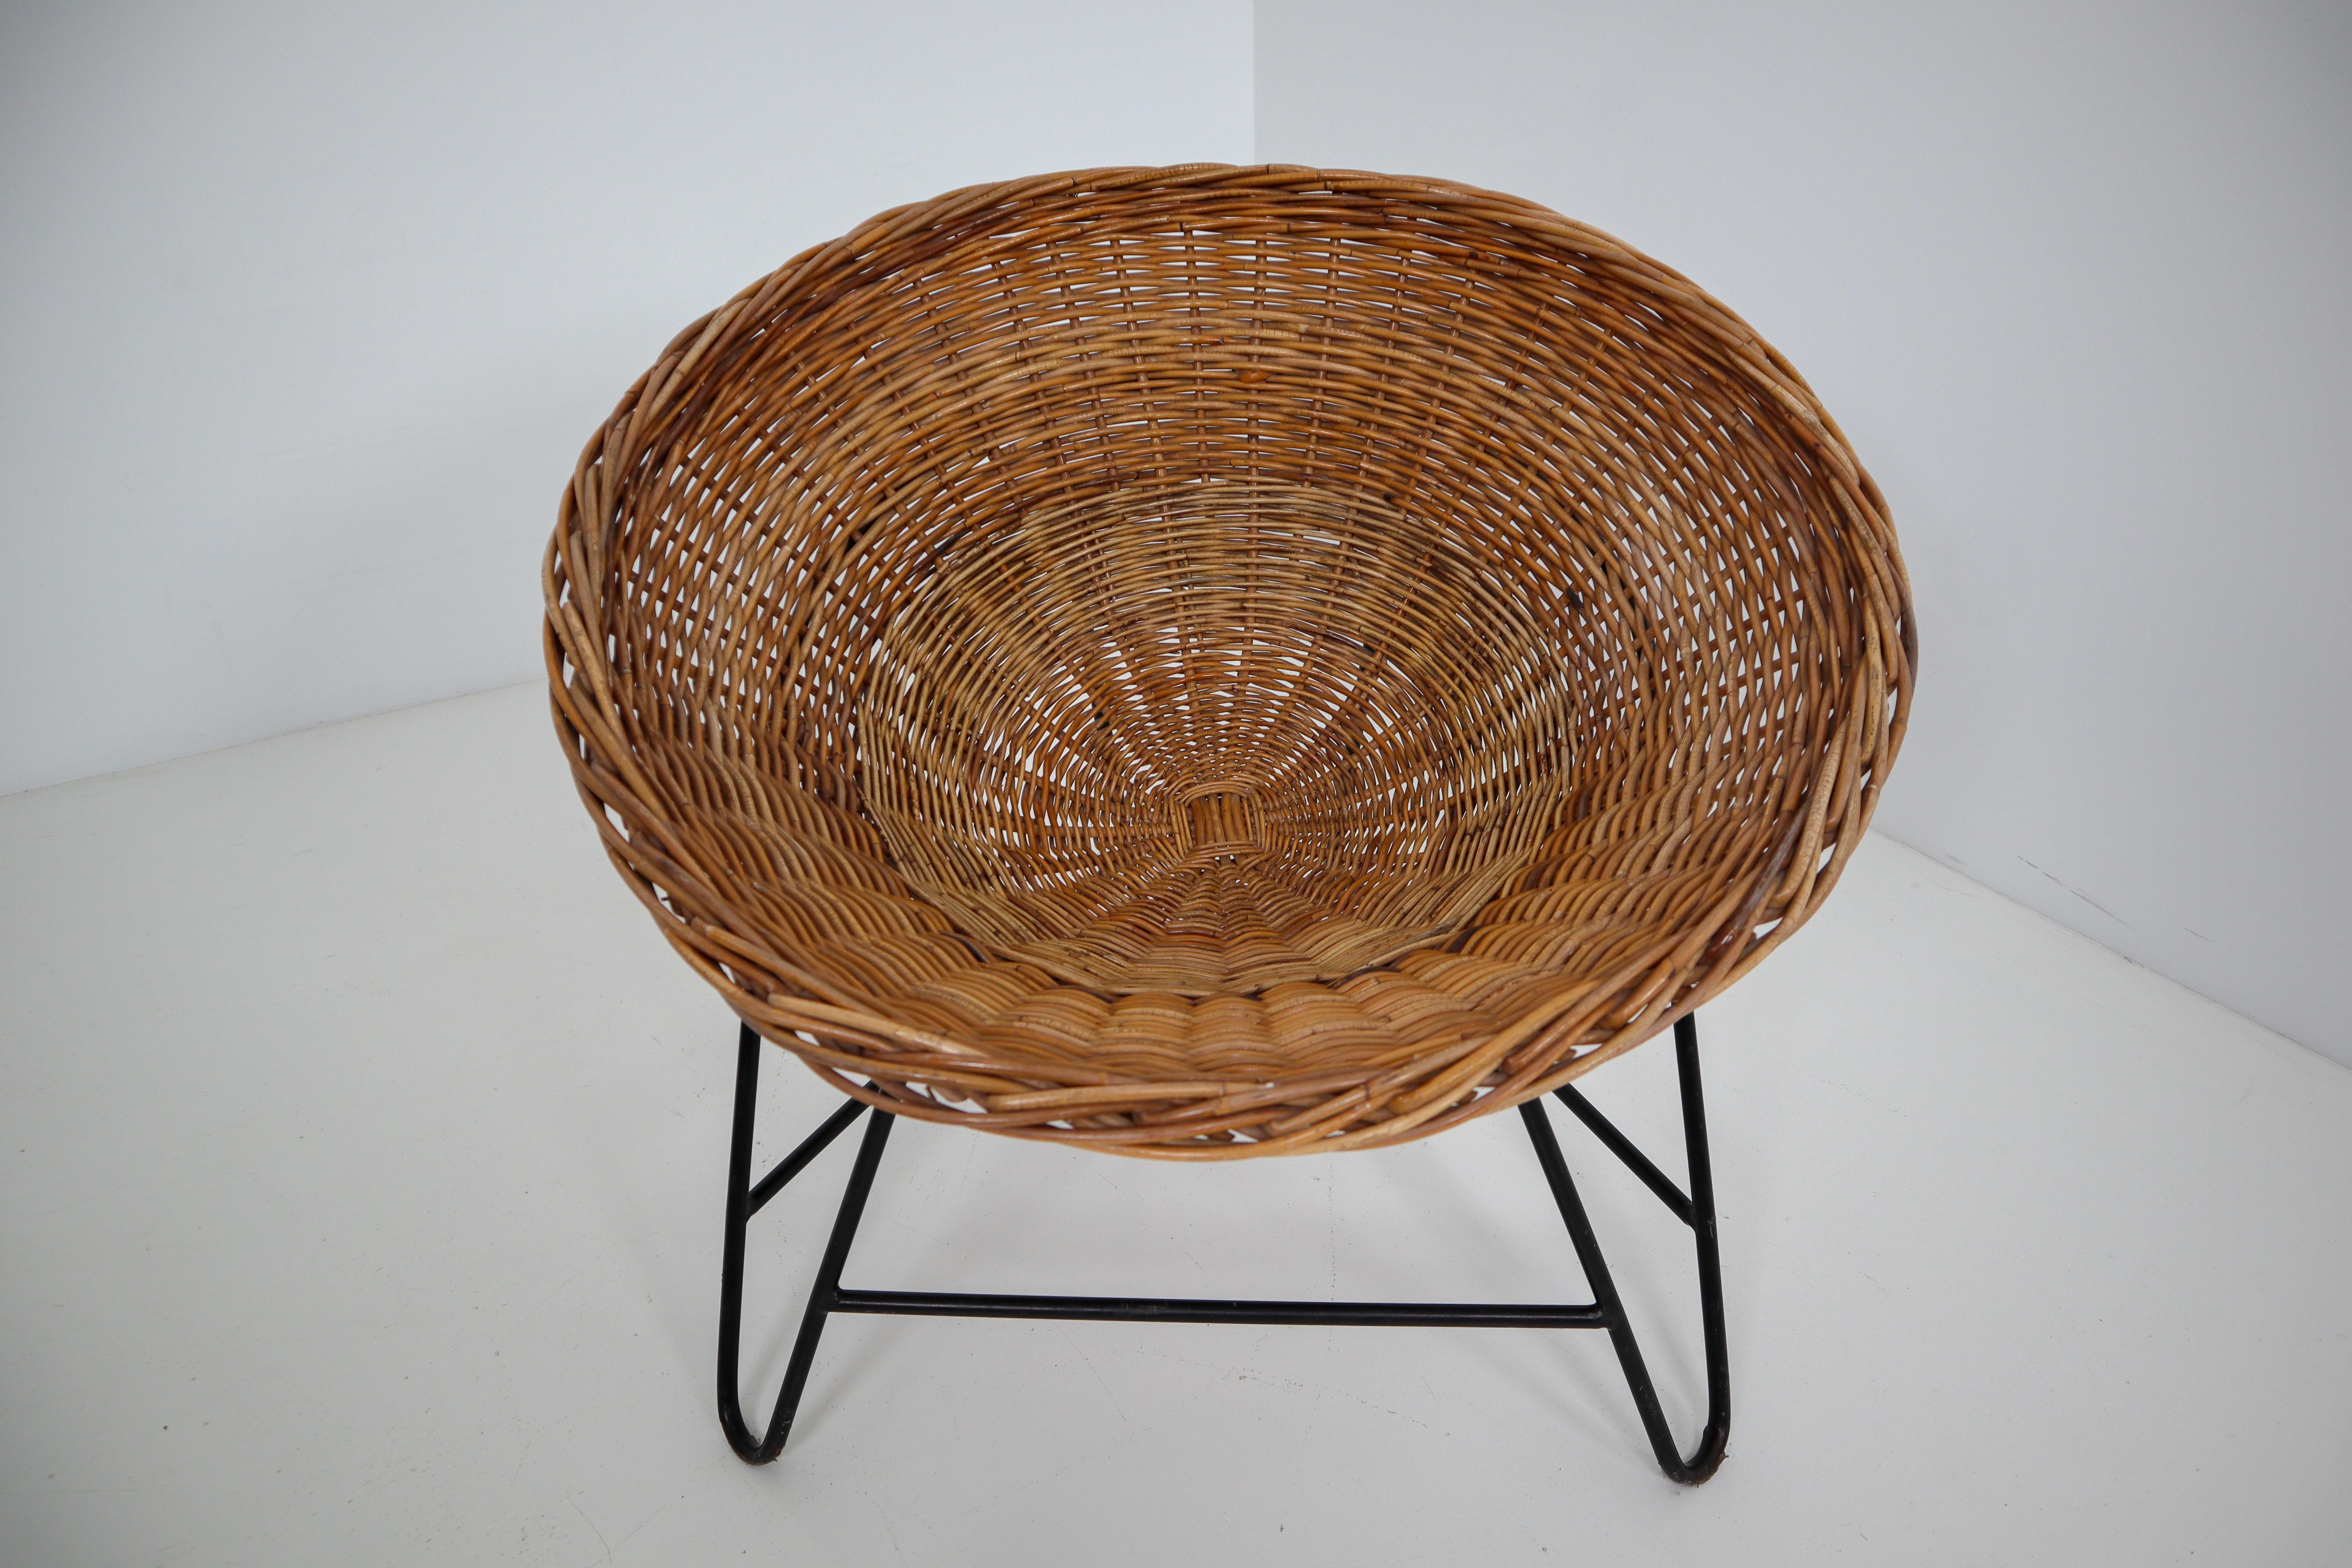 20th Century Midcentury Wicker Easy Lounge Patio Chairs Designed in Europe, 1960s